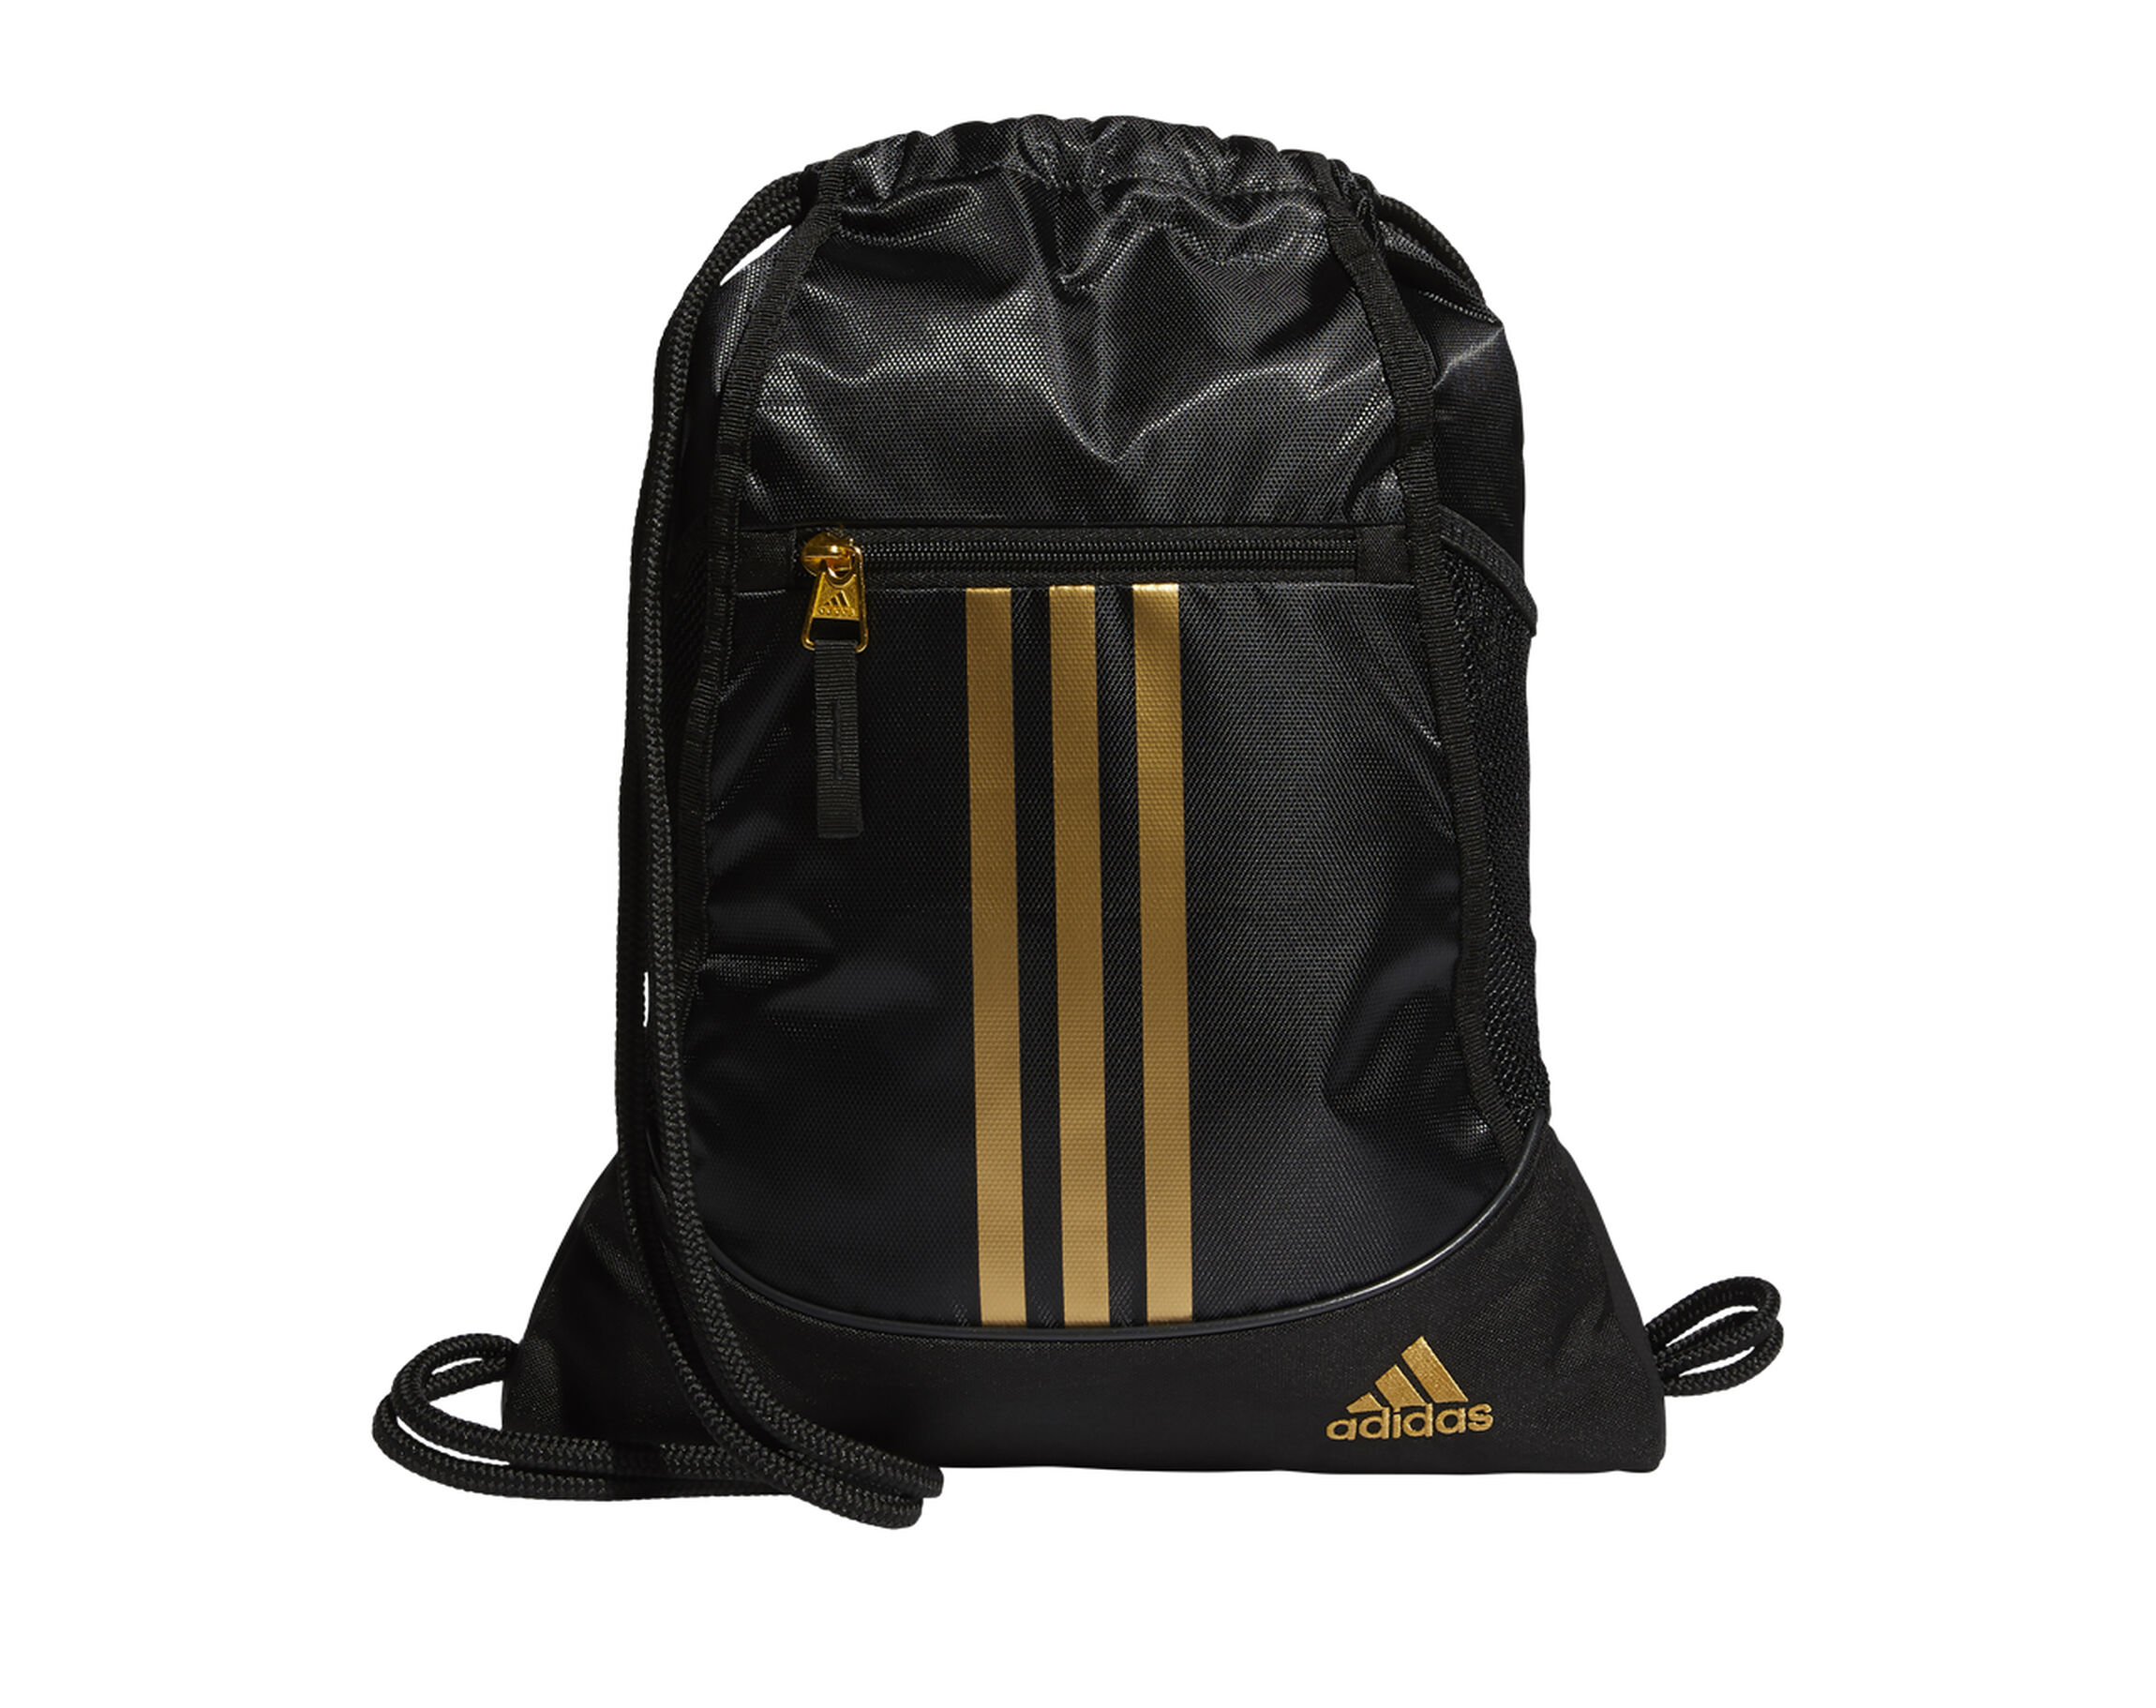 Adidas Alliance II Sackpack(Black - Size UNSZ - Nylon) from Shoe Carnival |  AccuWeather Shop